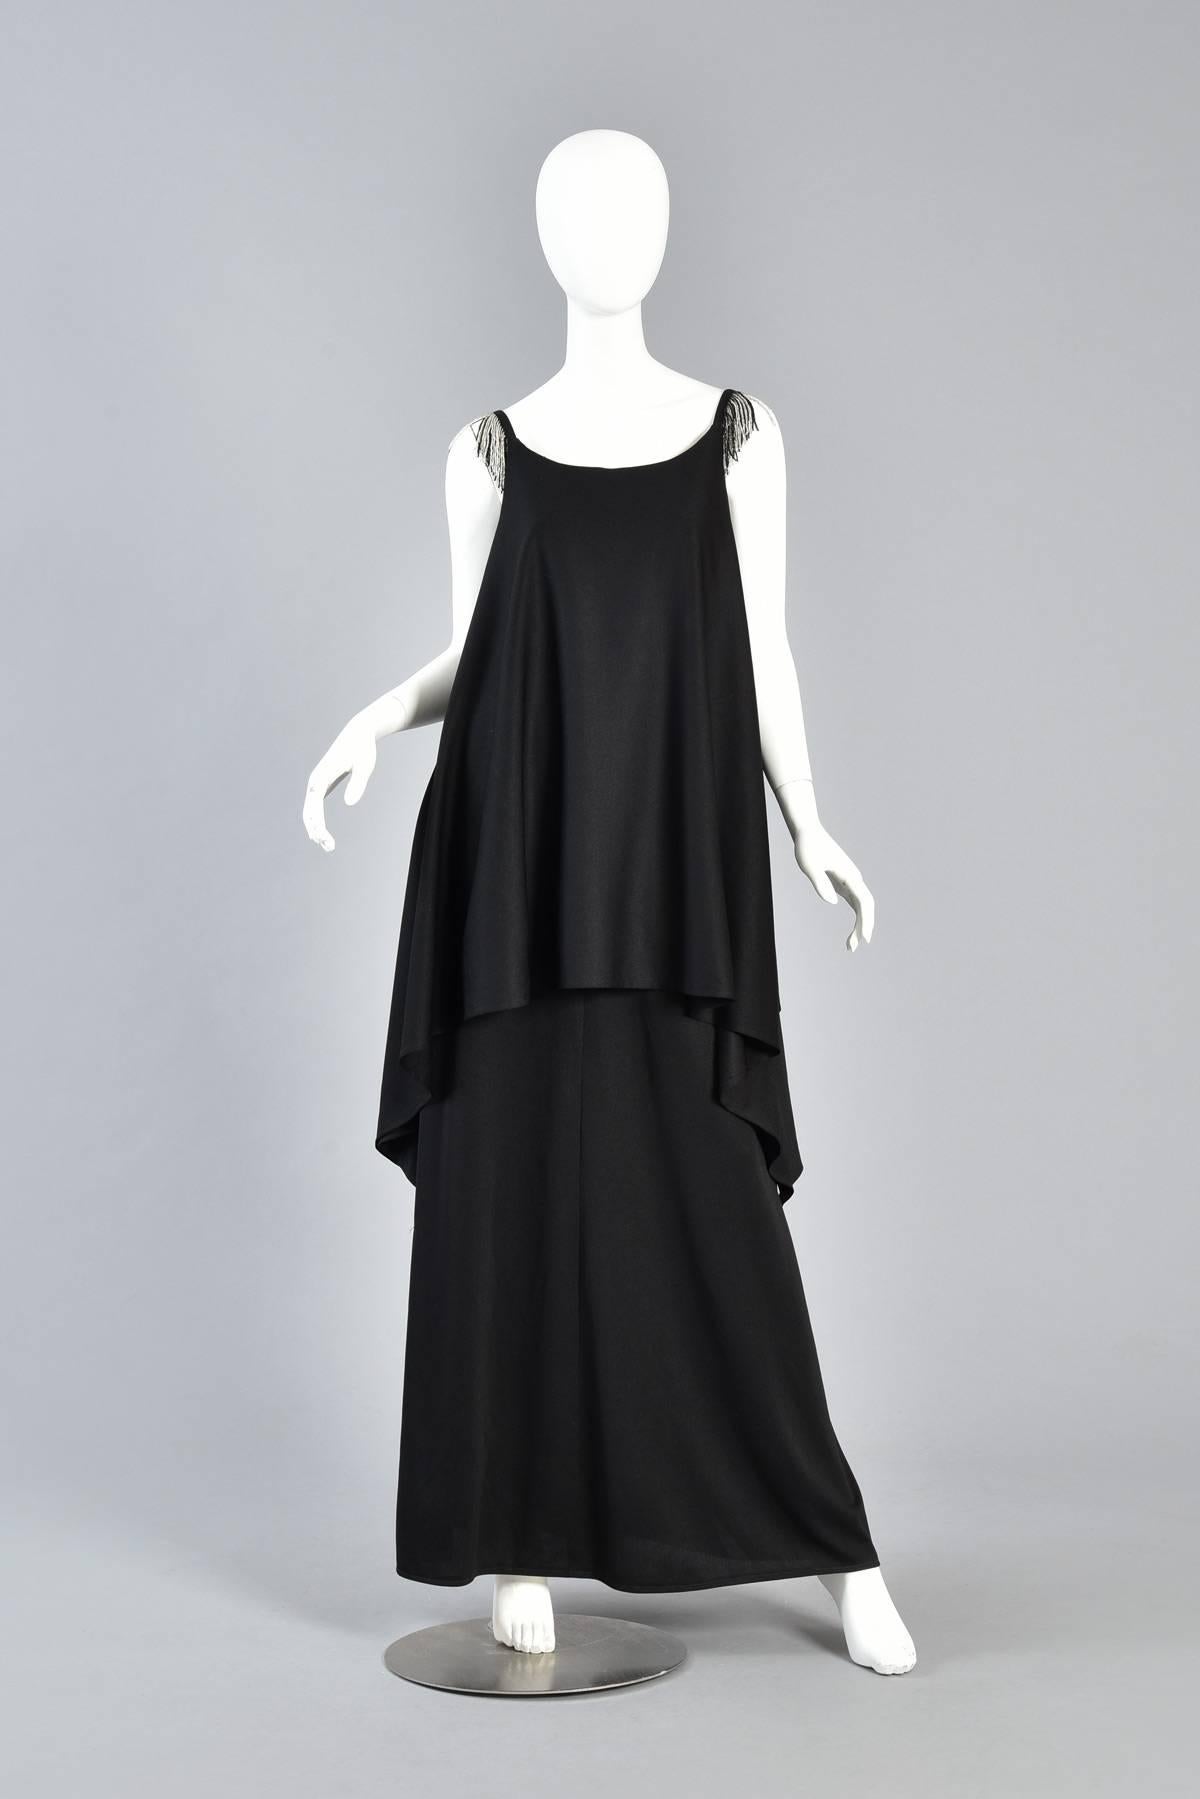 Simple & chic 1970s tiered evening gown. Heavyweight black jersey with high scooped neckline gives way to a flattering tiered & draped gown. We love how the top tier hangs longer on the sides! Also features beaded fringe shoulders for that little